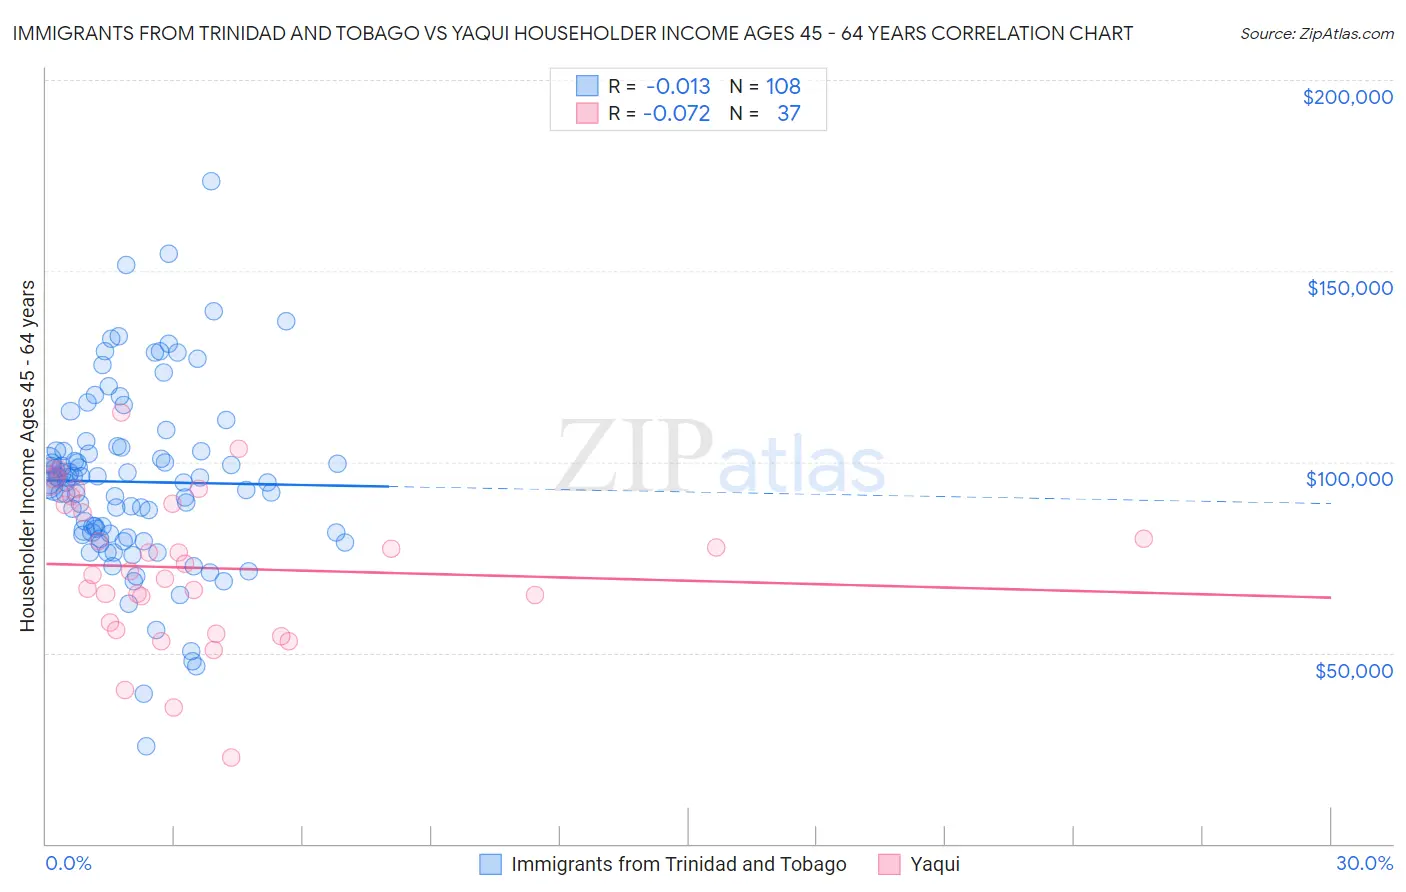 Immigrants from Trinidad and Tobago vs Yaqui Householder Income Ages 45 - 64 years